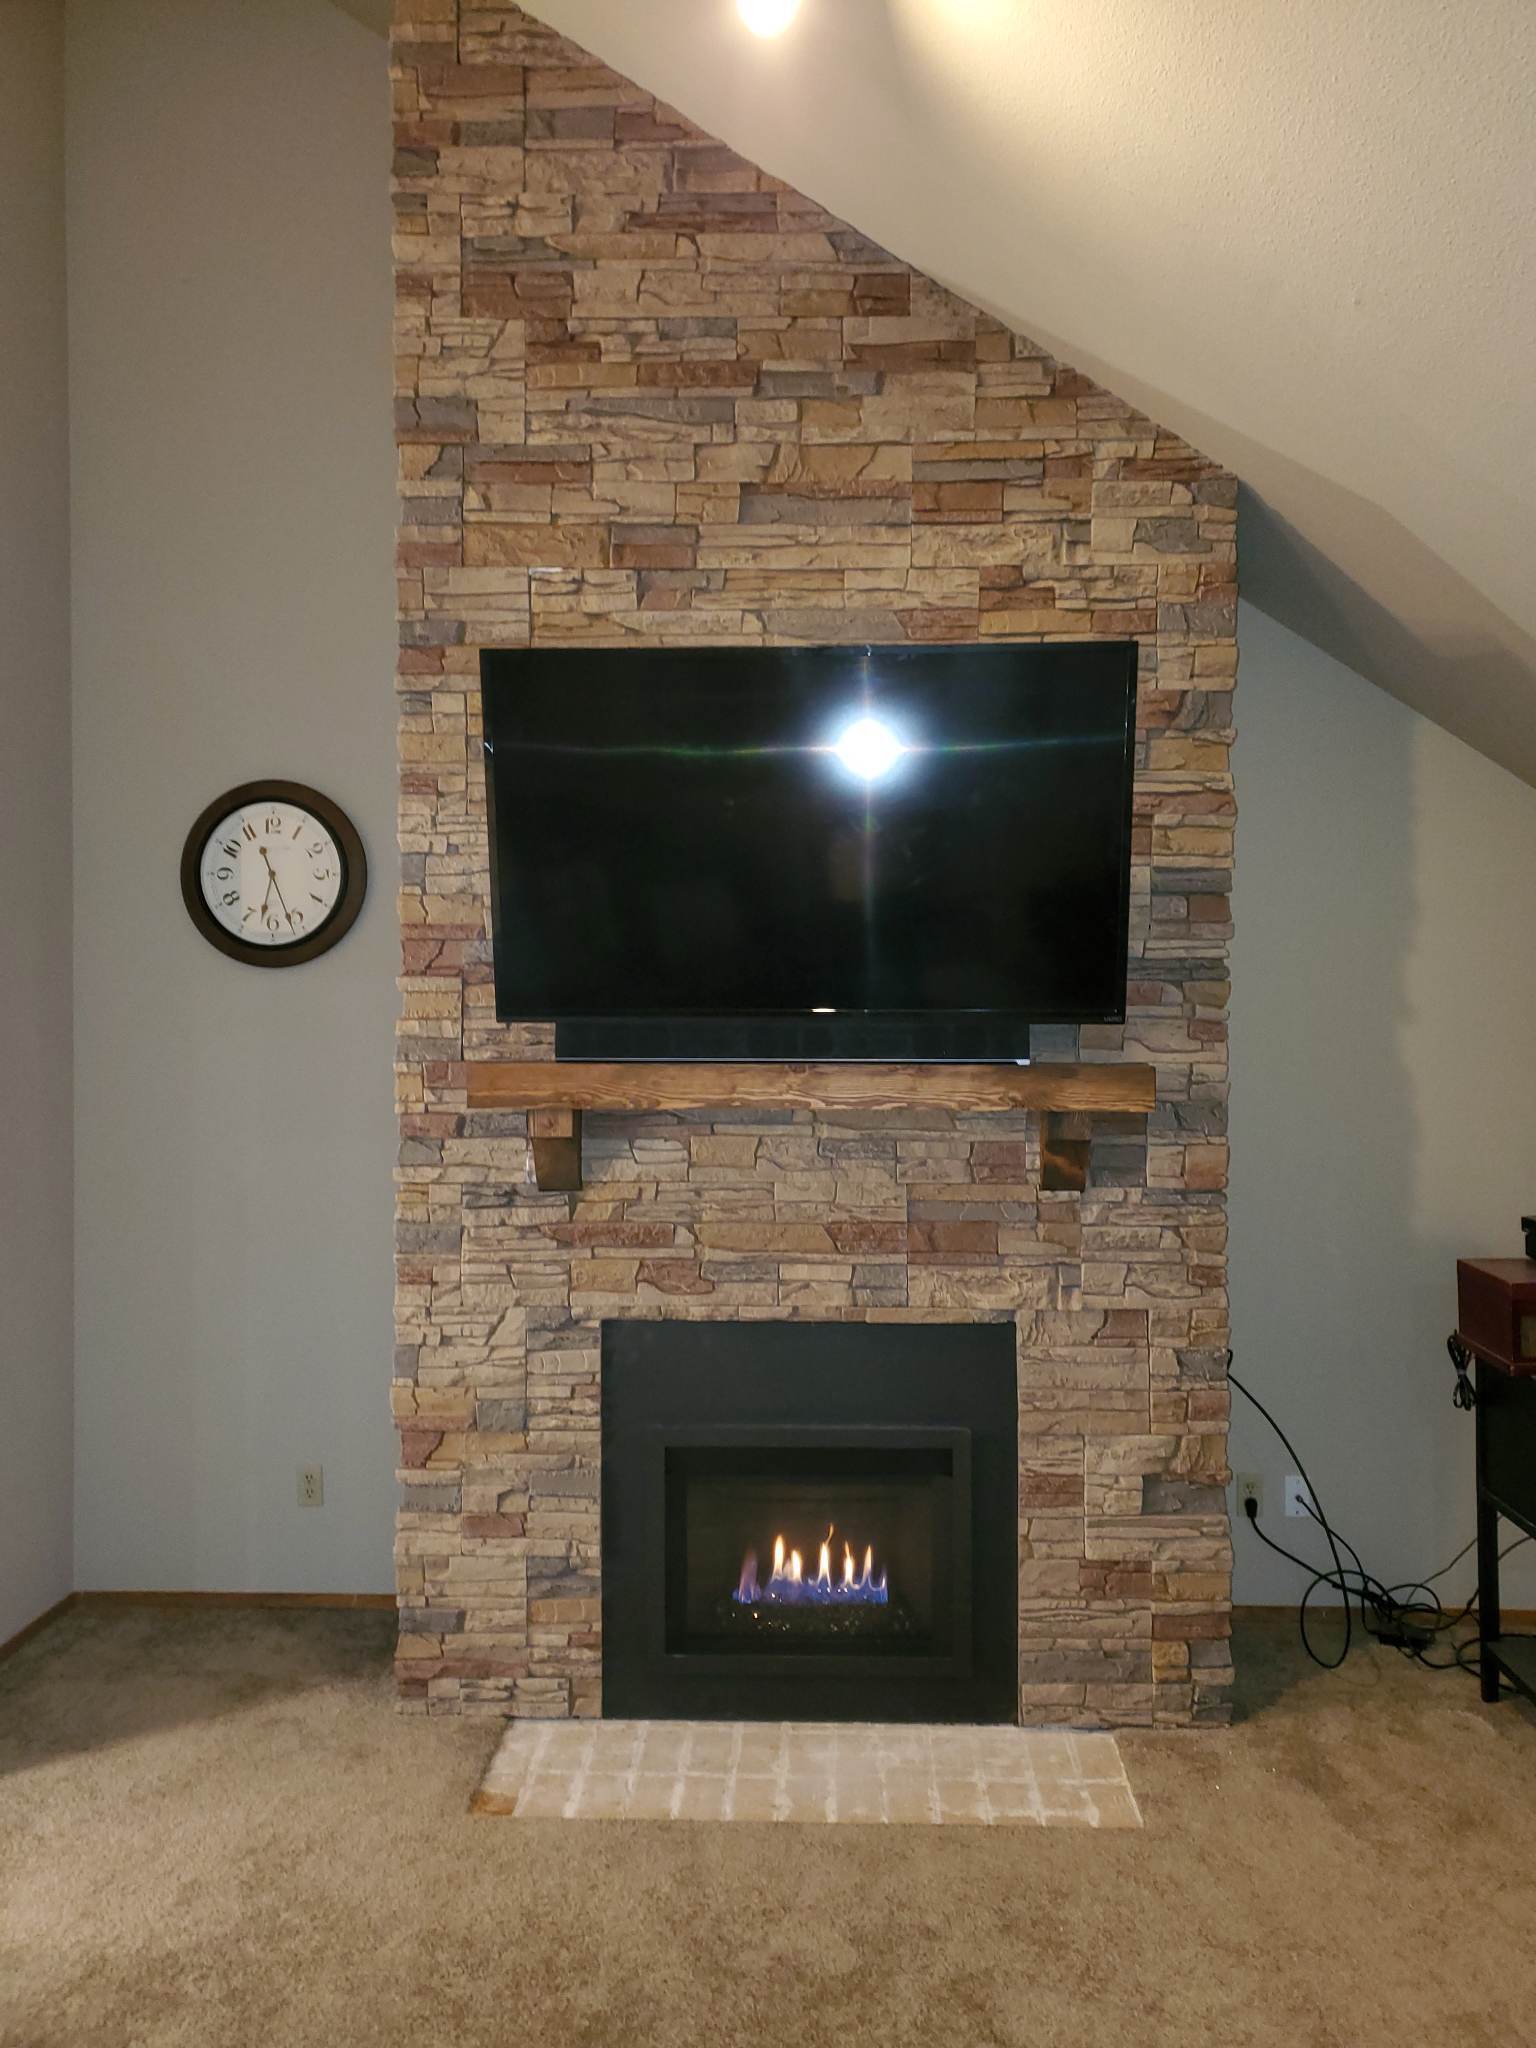 A DIY electric fireplace project using Desert Sunrise Stacked Stone.